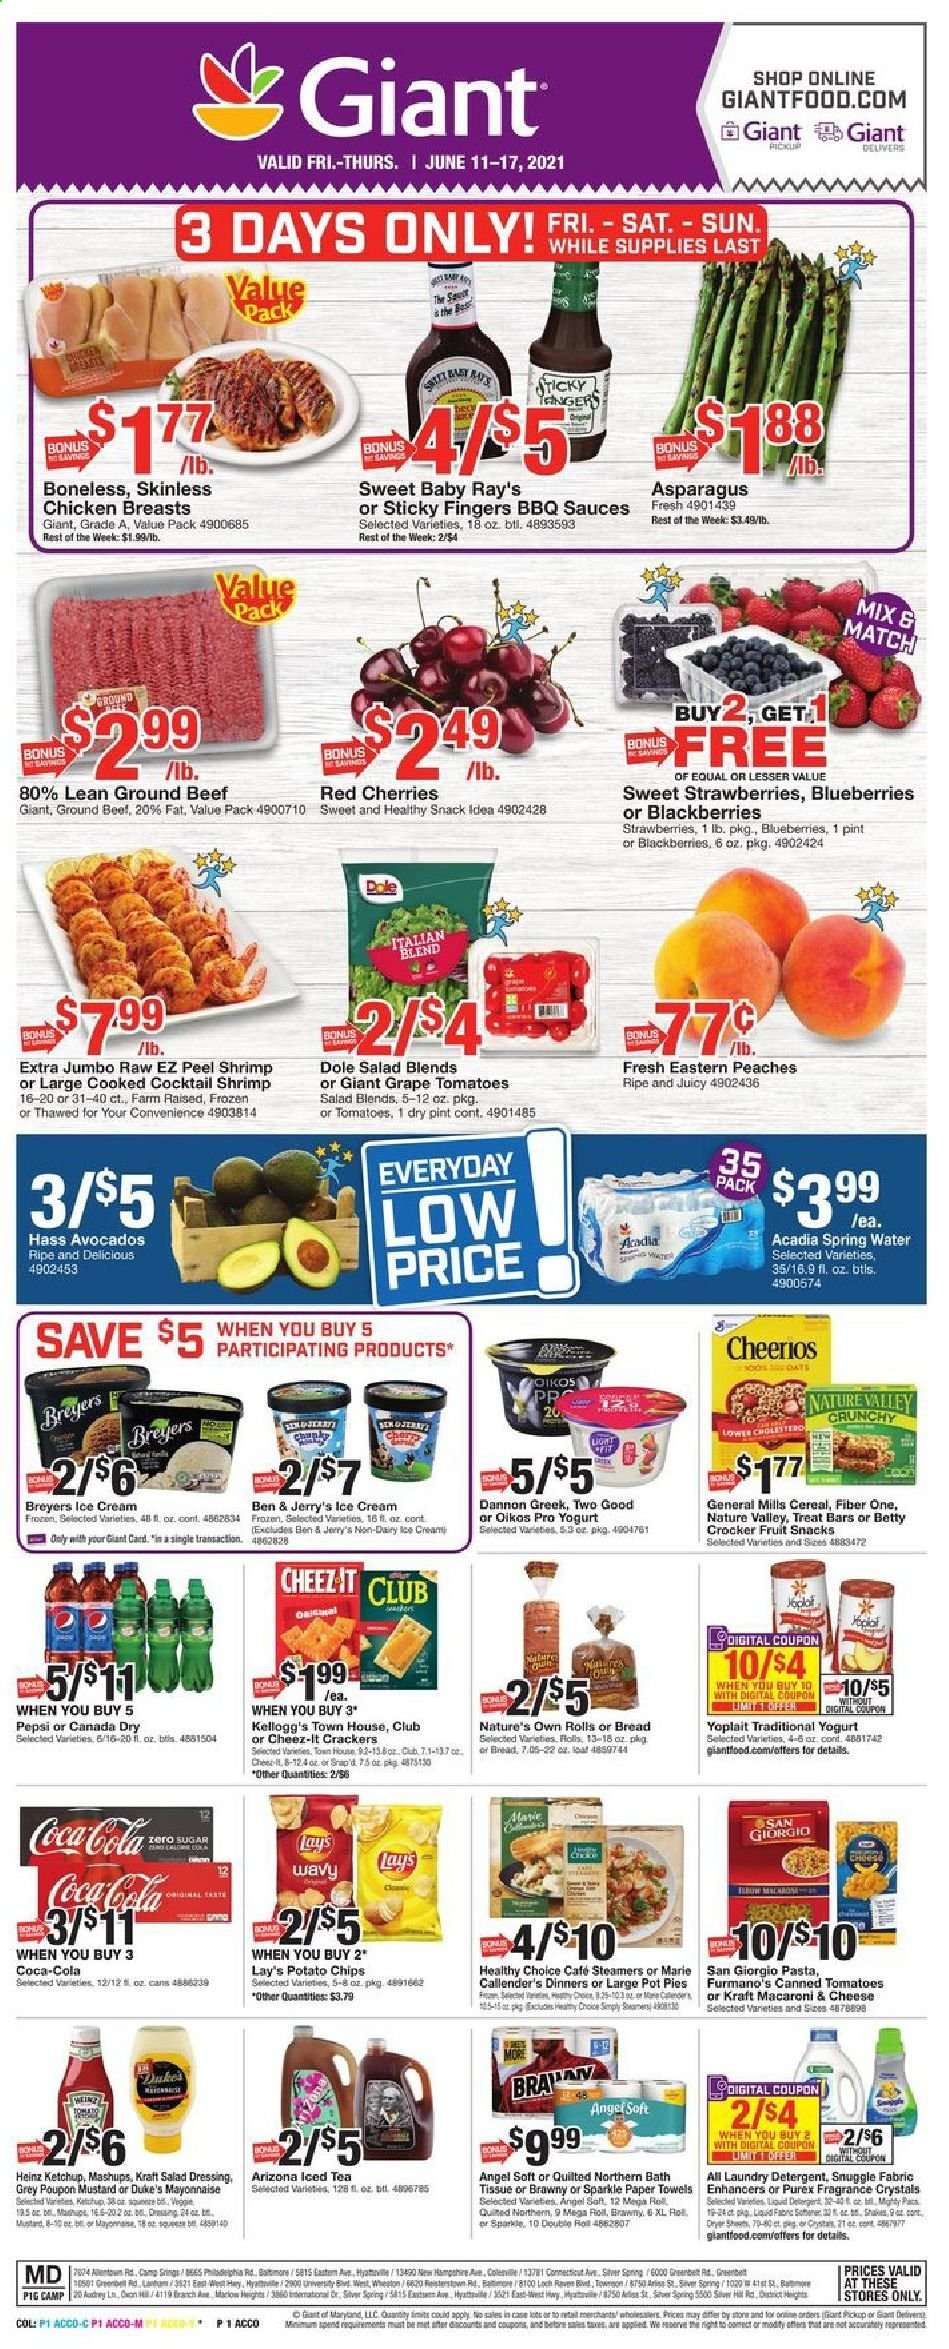 thumbnail - Giant Food Flyer - 06/11/2021 - 06/17/2021 - Sales products - pot pie, asparagus, Dole, avocado, blackberries, blueberries, strawberries, cherries, shrimps, macaroni & cheese, pasta, Healthy Choice, Kraft®, yoghurt, Oikos, Yoplait, Dannon, shake, mayonnaise, ice cream, Ben & Jerry's, crackers, Kellogg's, fruit snack, potato chips, Lay’s, Cheez-It, Heinz, cereals, Cheerios, Nature Valley, Fiber One, mustard, salad dressing, ketchup, dressing, Canada Dry, Coca-Cola, Pepsi, ice tea, AriZona, spring water, Acadia, chicken breasts, beef meat, ground beef, bath tissue, Quilted Northern, kitchen towels, paper towels, detergent, Snuggle, laundry detergent, Purex, fragrance, Nature's Own, peaches. Page 1.